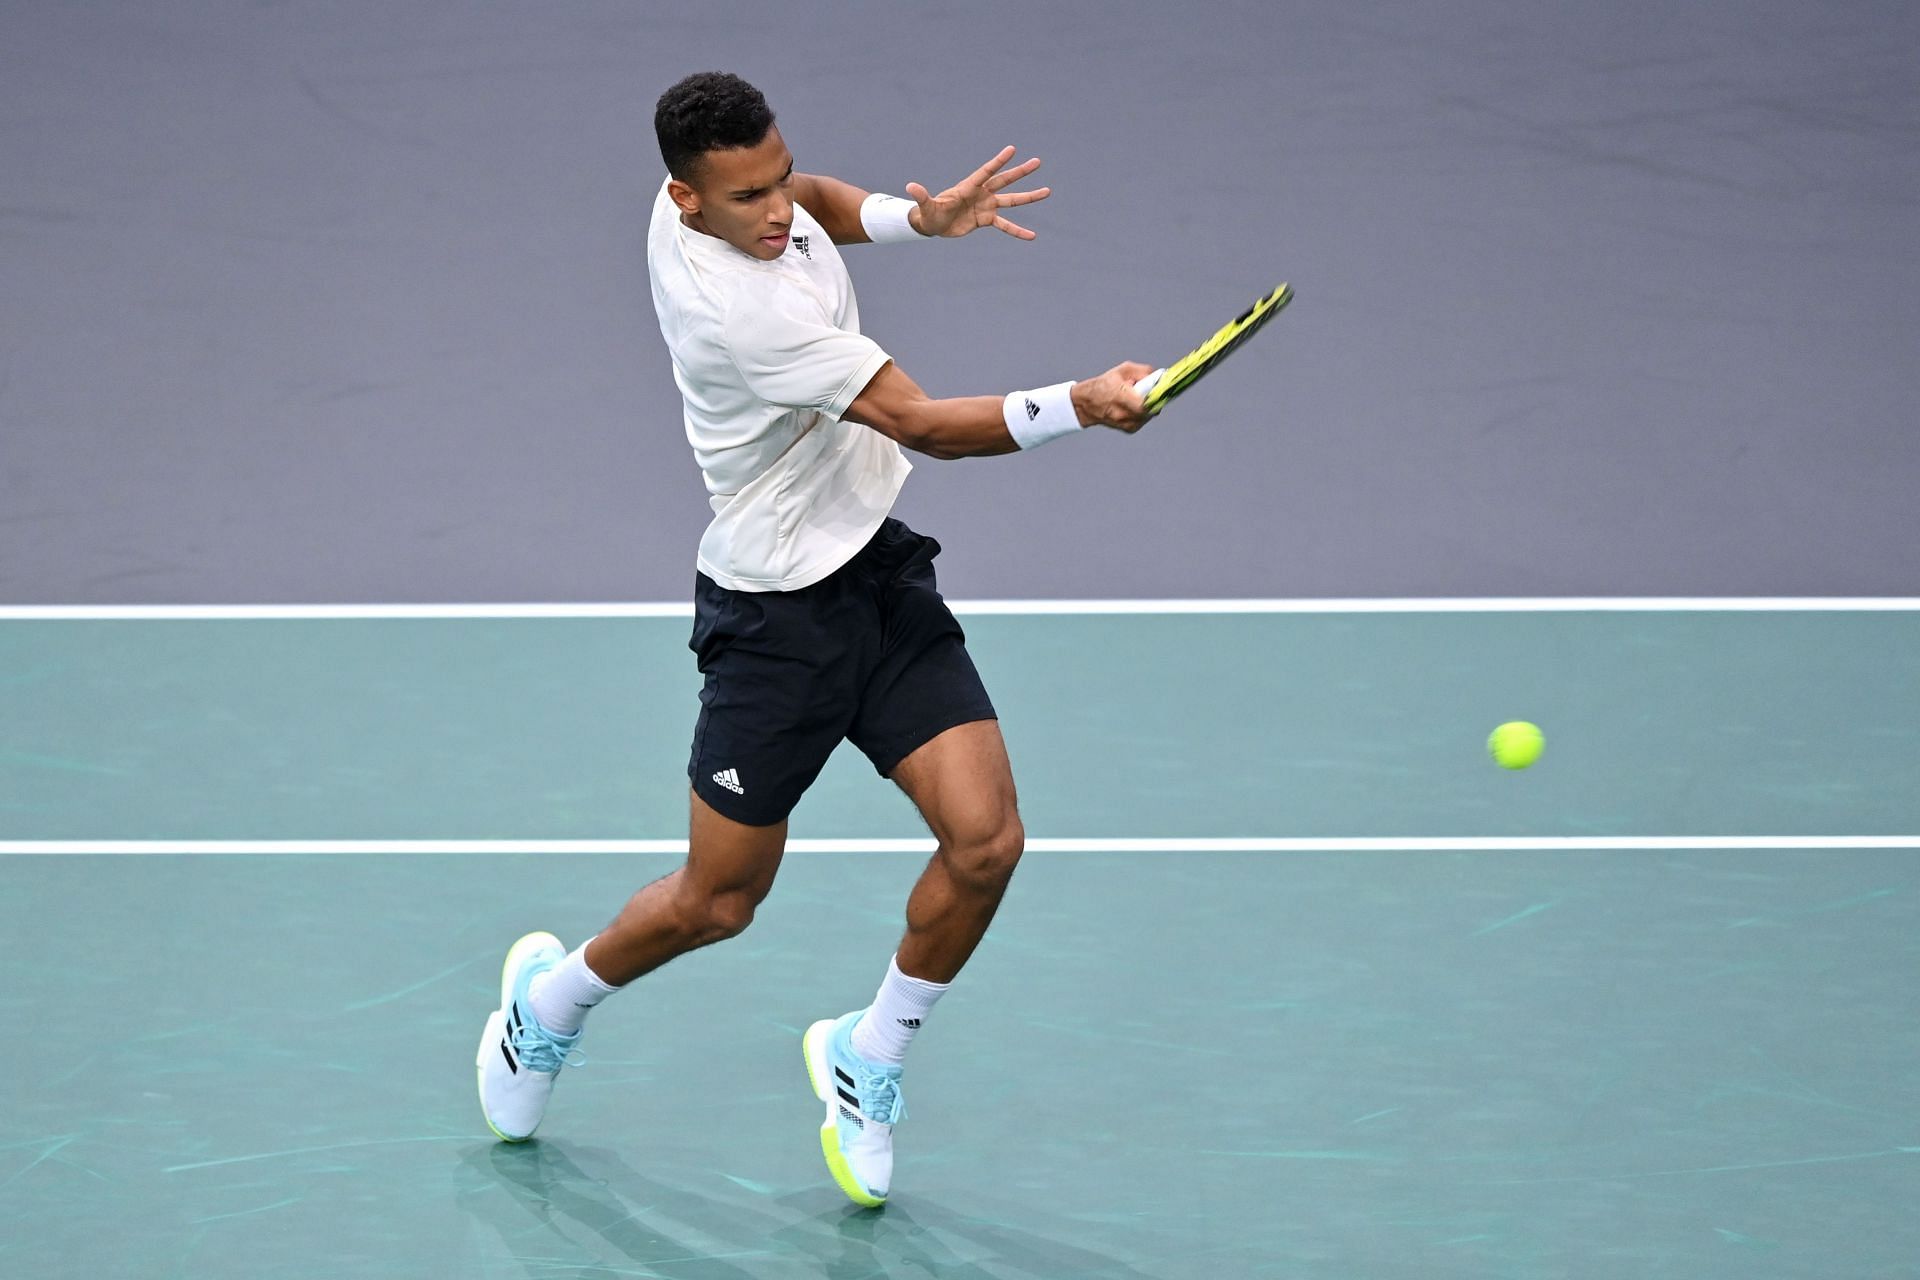 Felix Auger-Aliassime in action durint the Rolex Paris Masters - Day Two